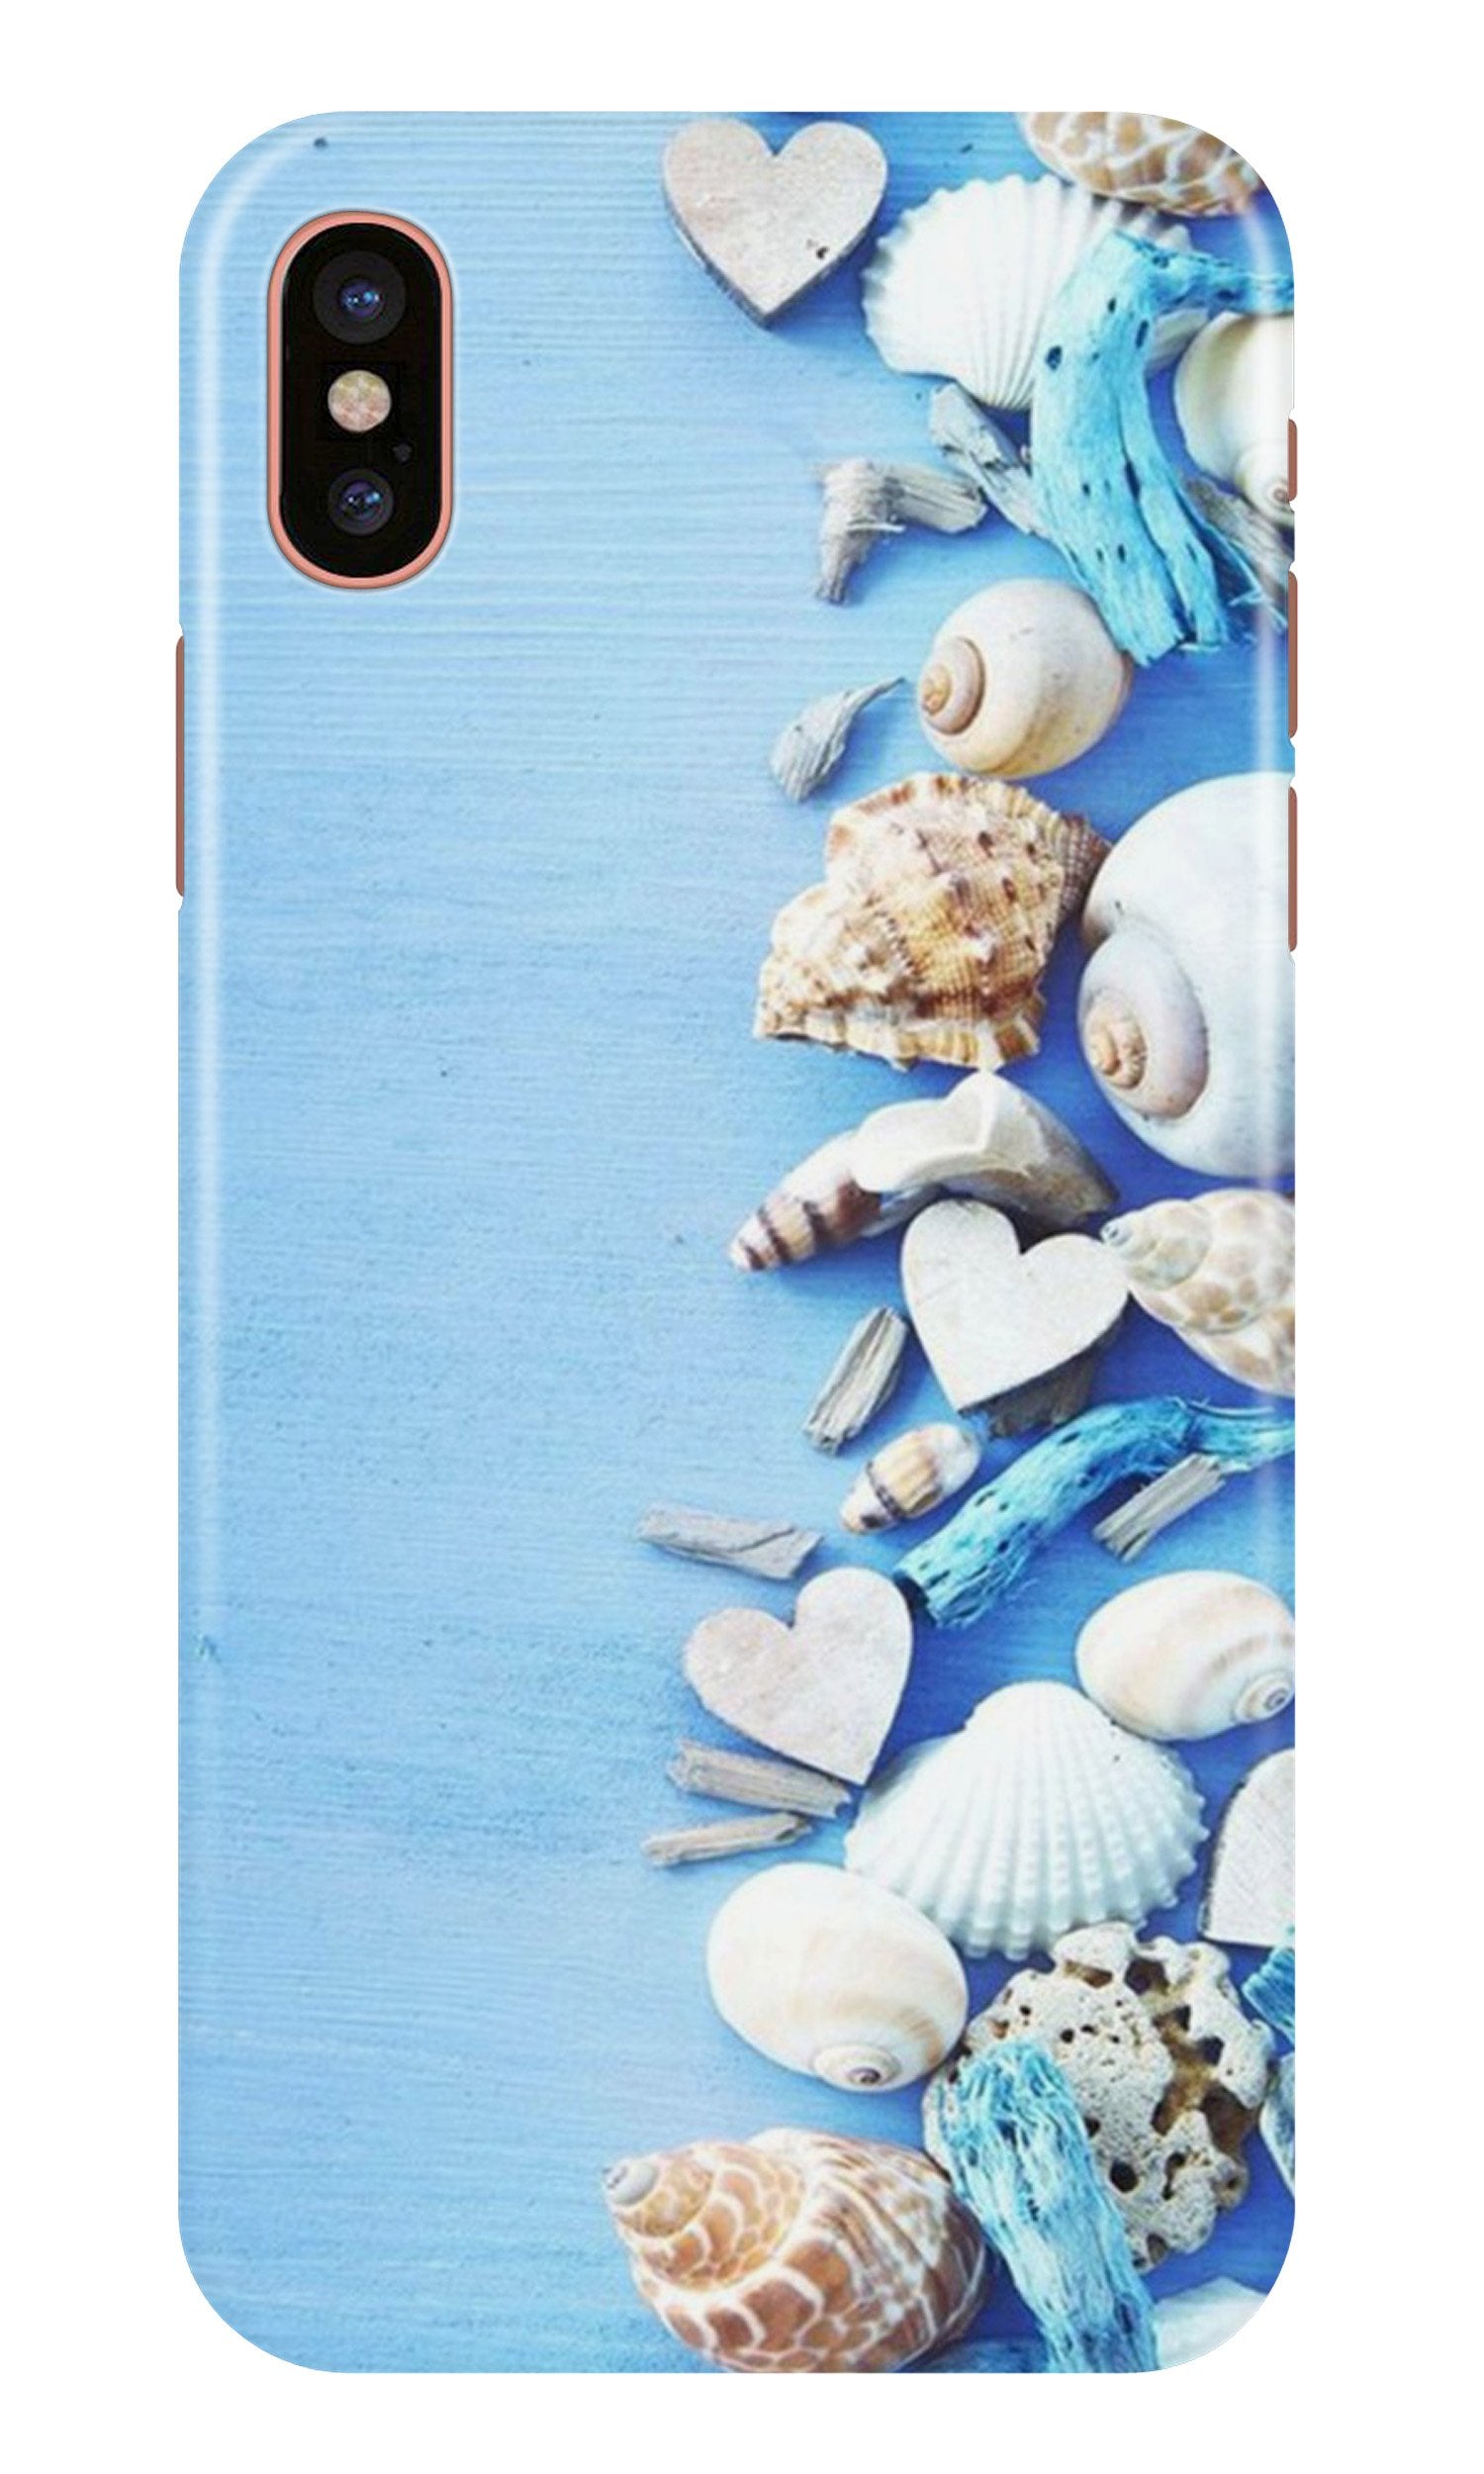 Sea Shells2 Case for iPhone X